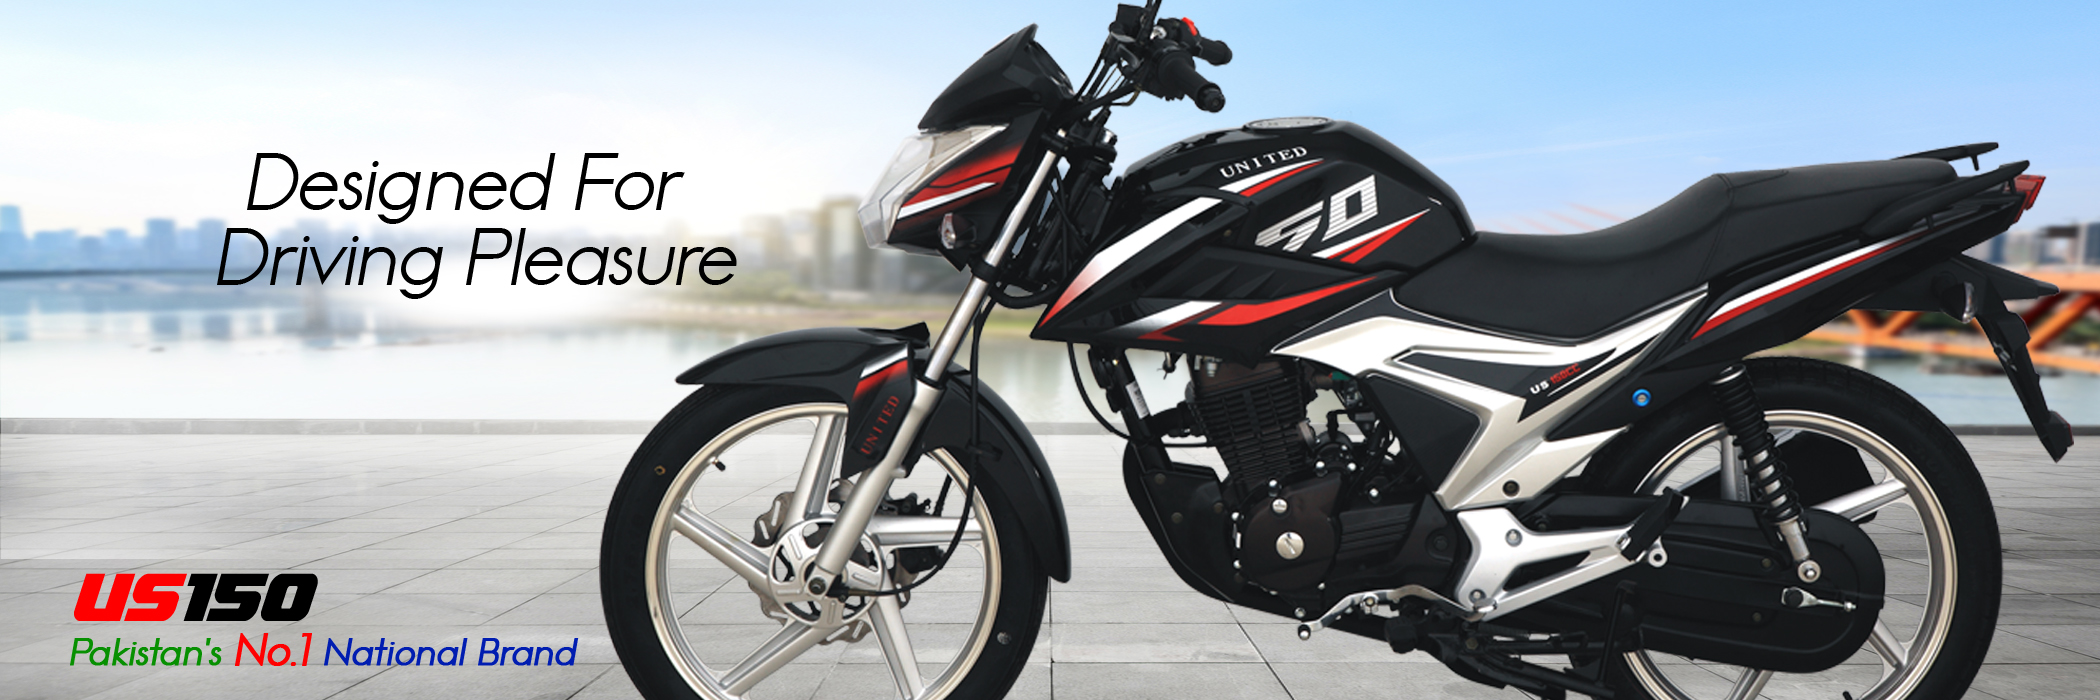 United Motorcycle Pakistan S No 1 National Brand For Further Detail Call 92 42 35201881 3